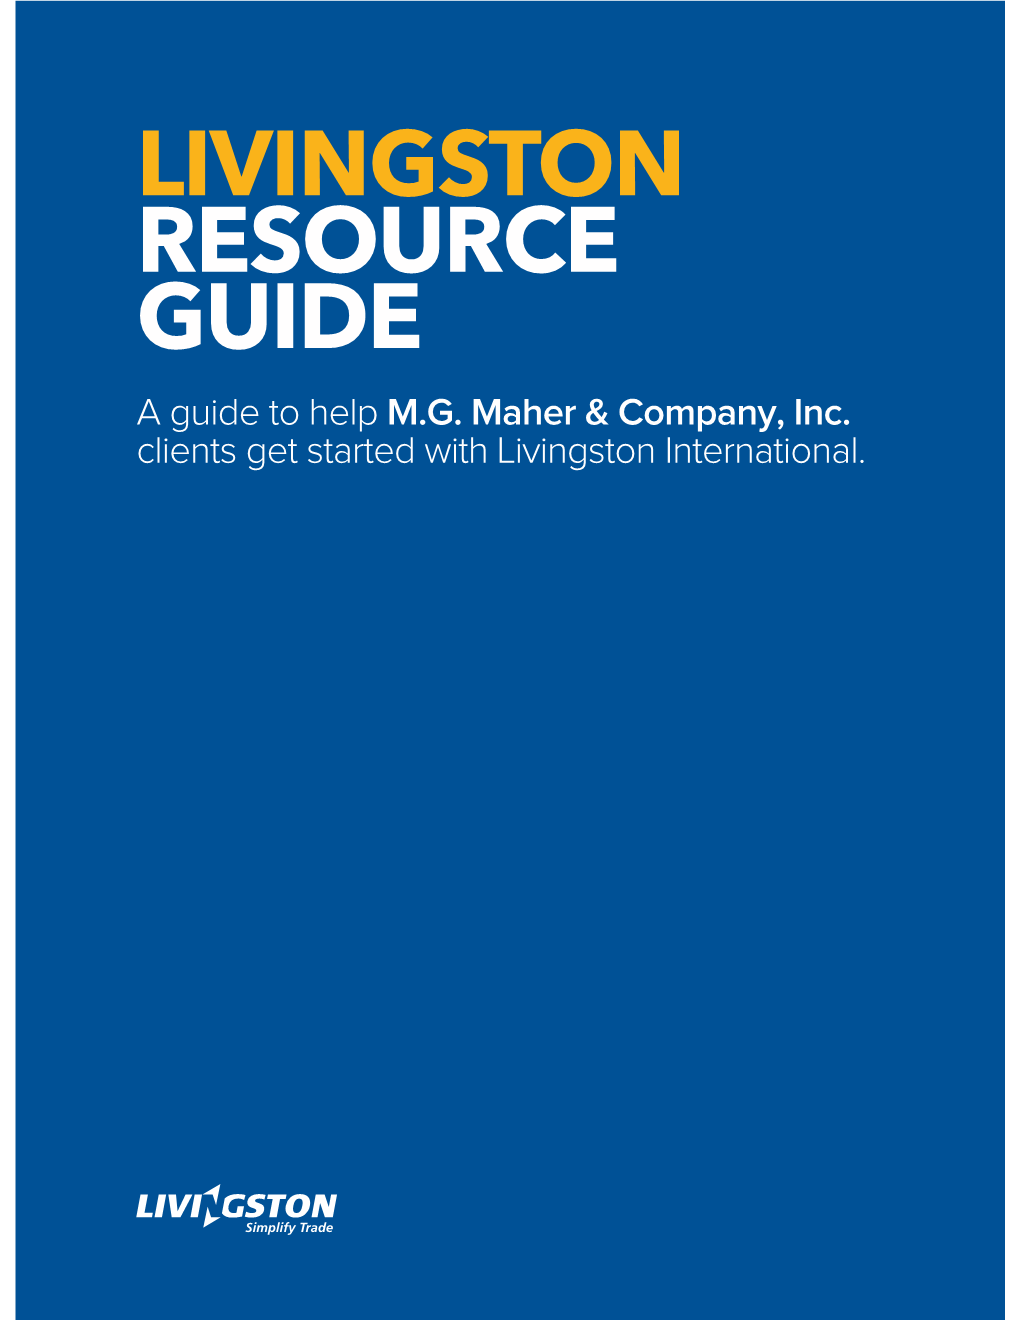 LIVINGSTON RESOURCE GUIDE a Guide to Help M.G